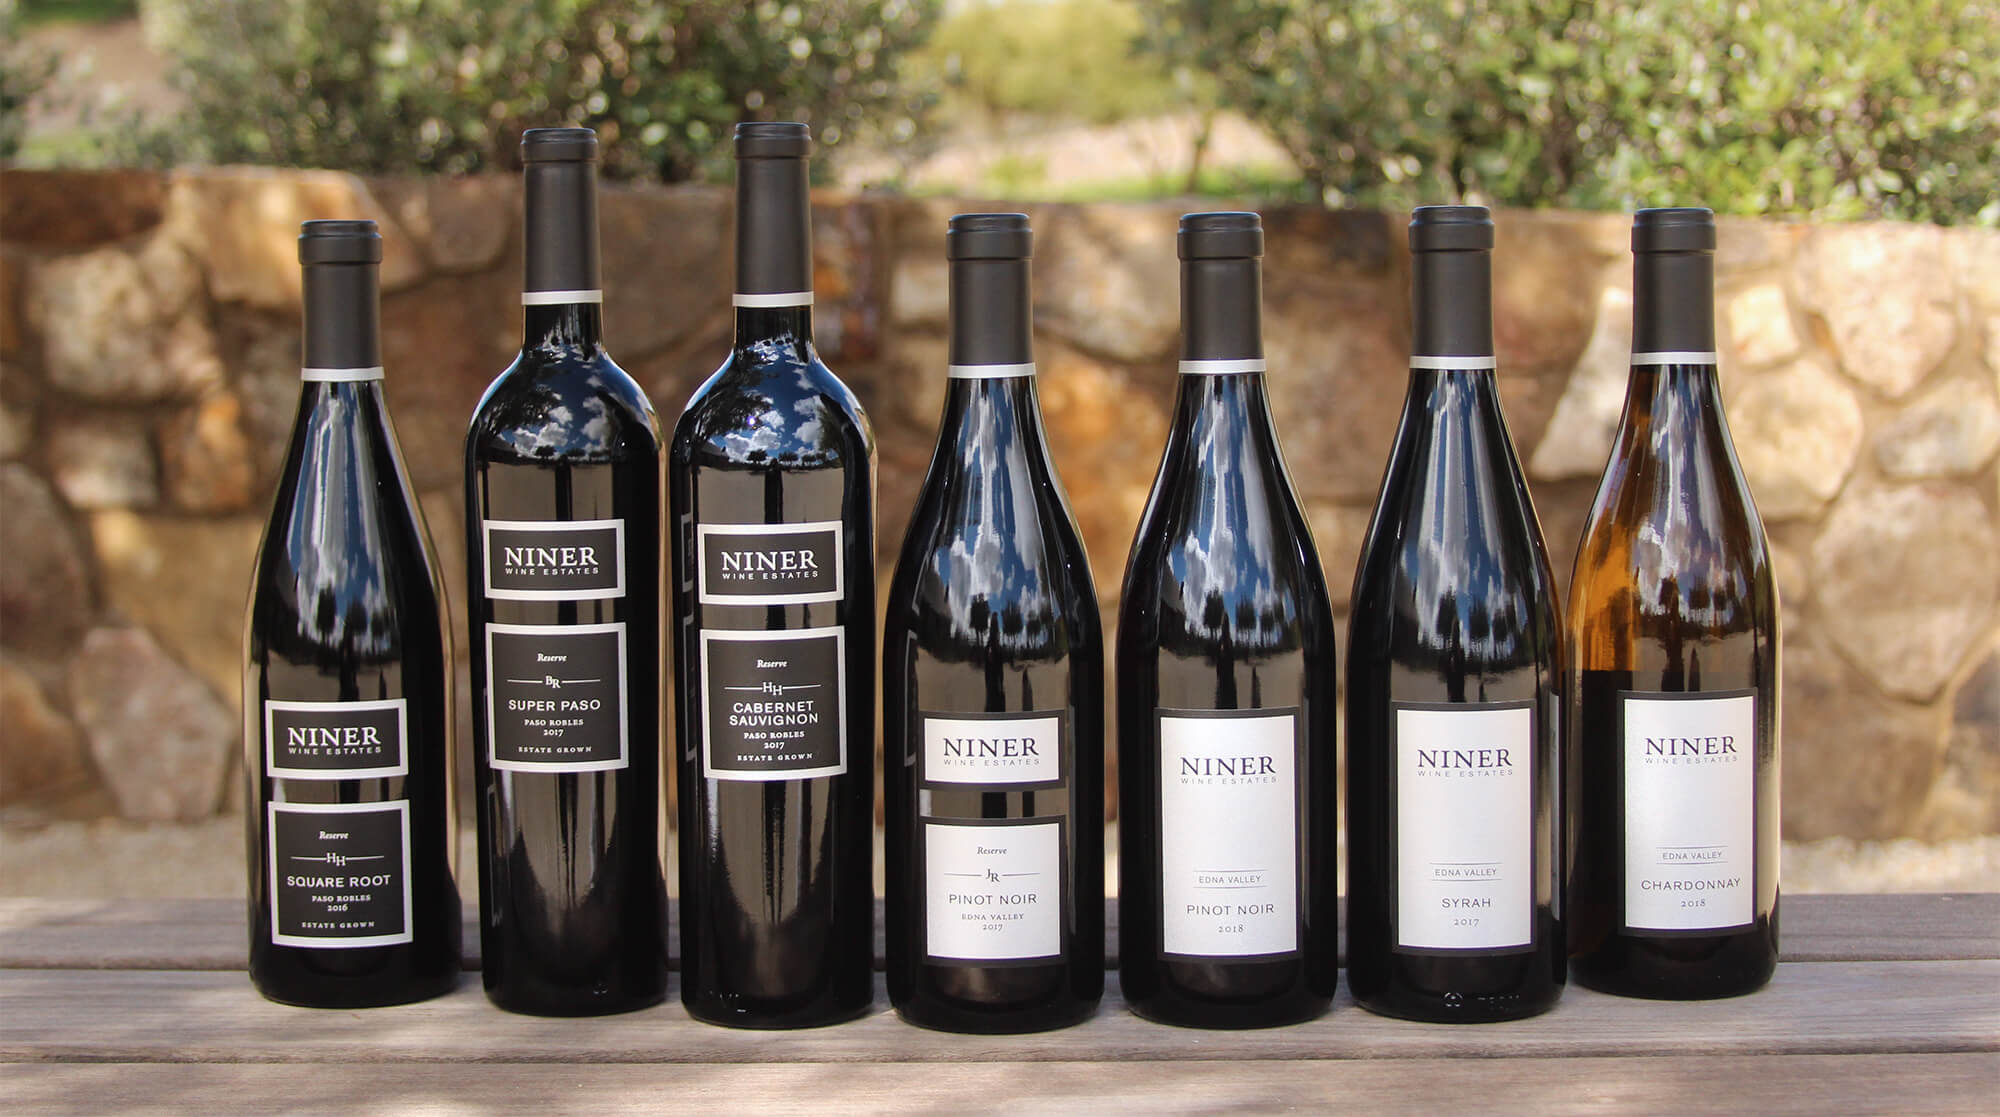 A lineup of the new releases in our May Wine Club Shipment; Square Root, Super Paso, Cabernet Sauvignon, Reserve Pinot noir, Pinot Noir, Syrah, Chardonnay